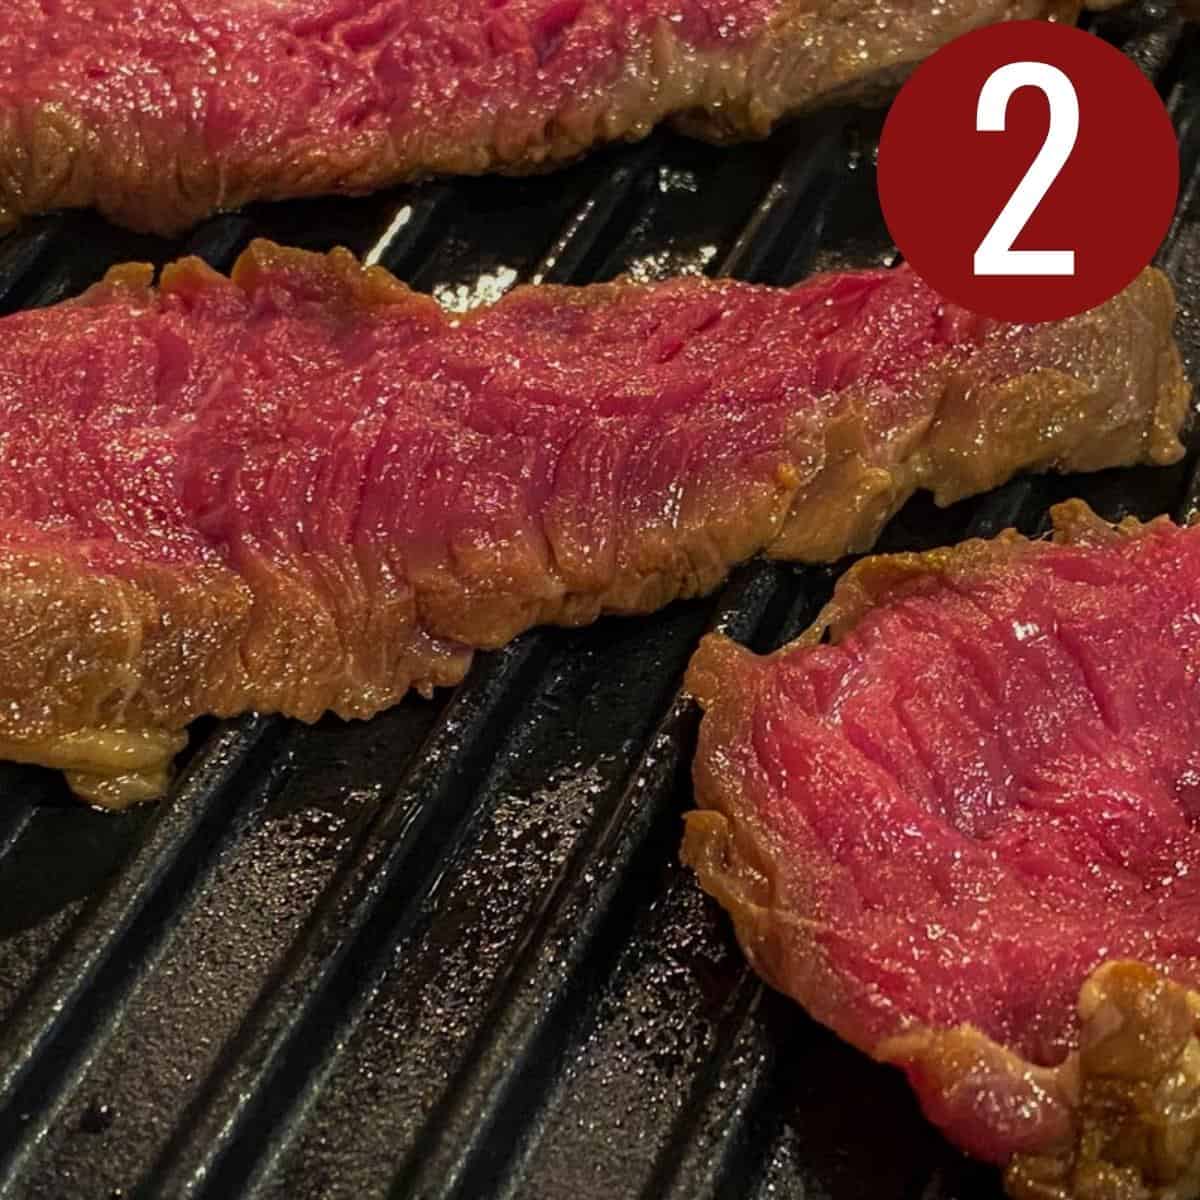 Slices of beef on a griddle